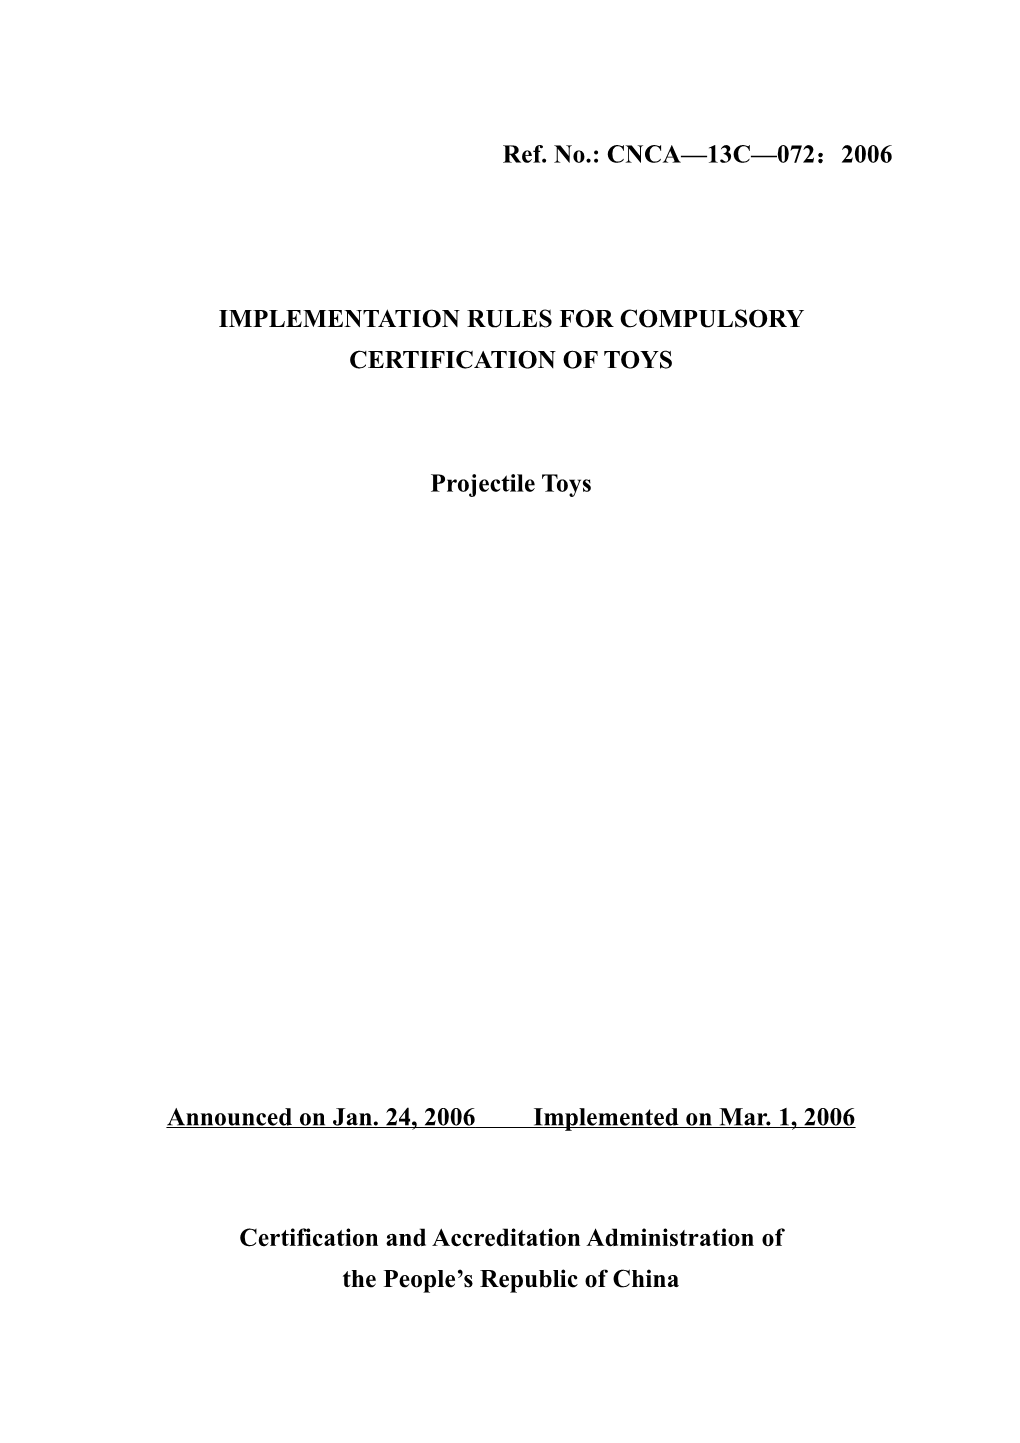 Implementation Rules for Compulsory Certification of Toys